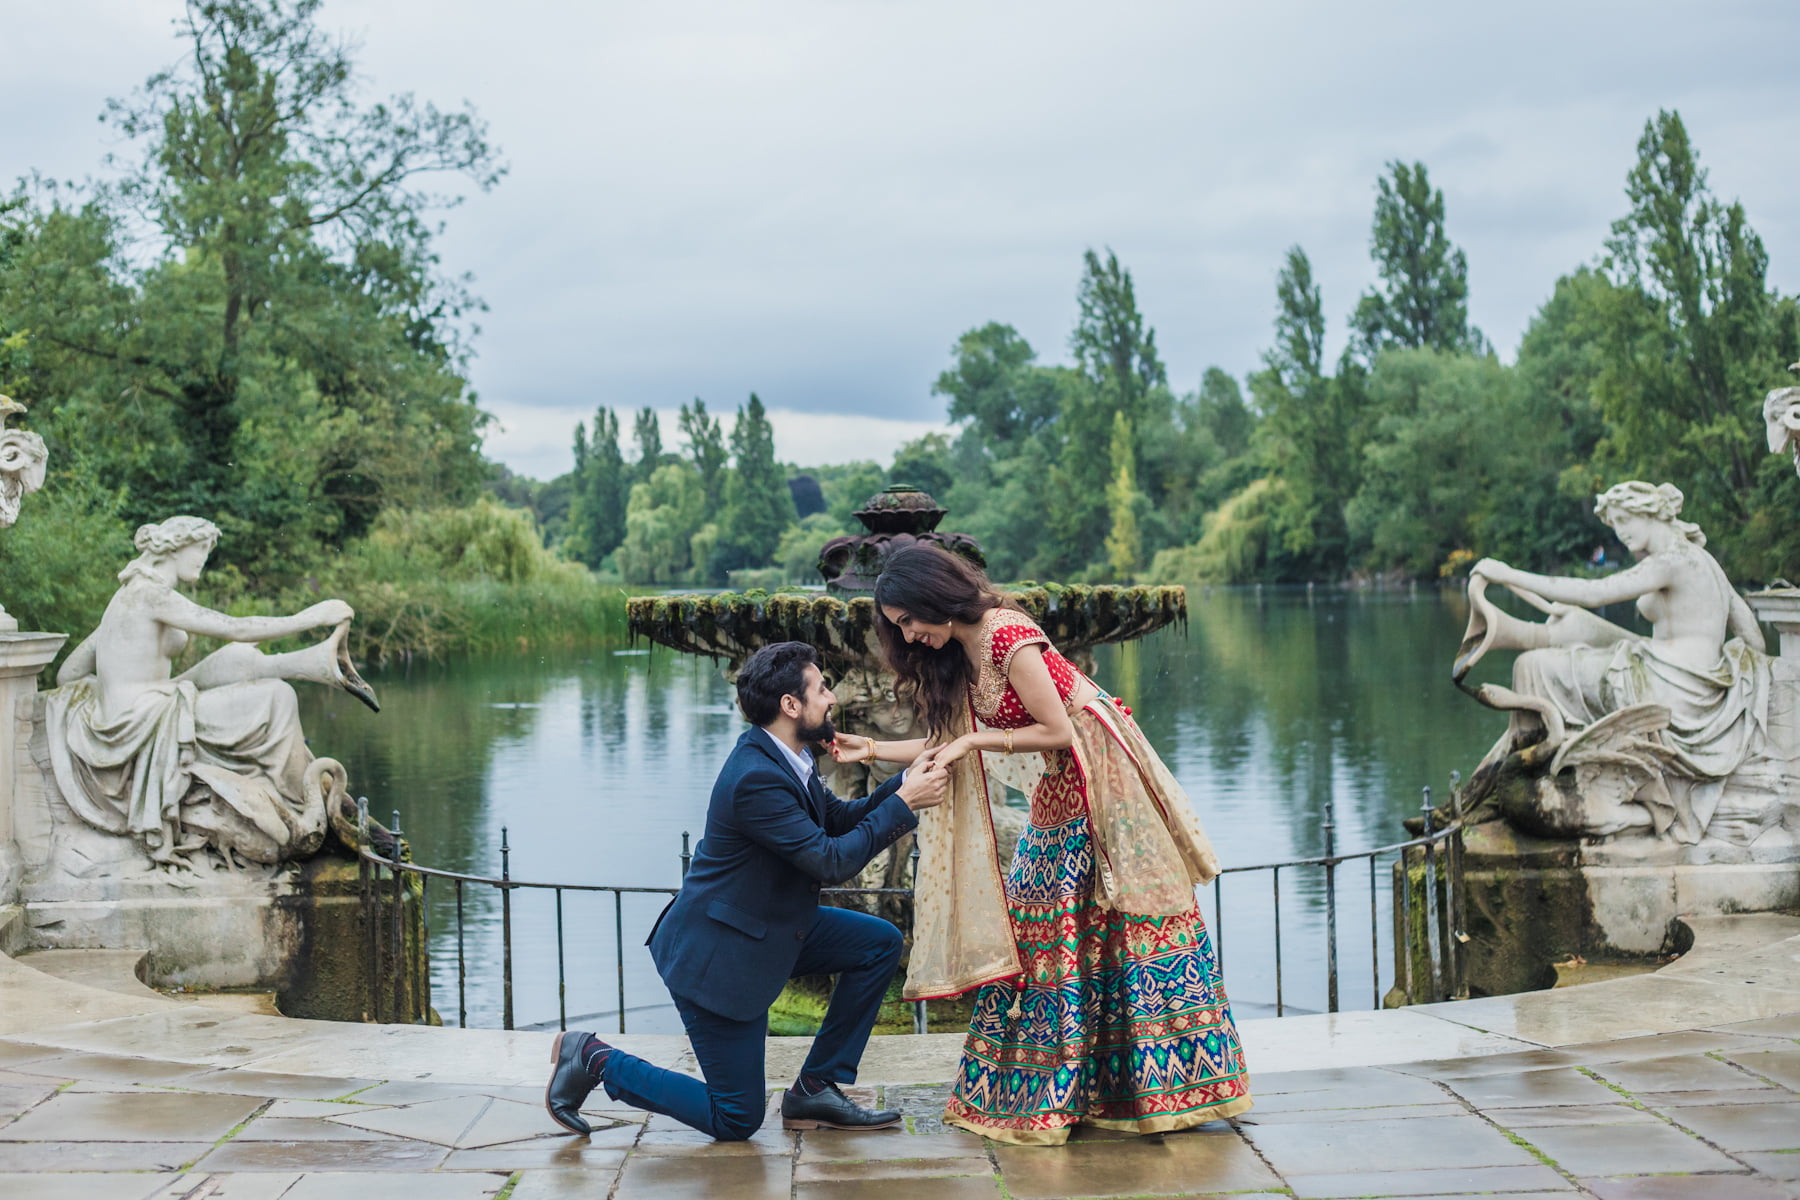 Wedding proposal photoshoot from stylish Indian groom to Indian bride in Hyde Park, London